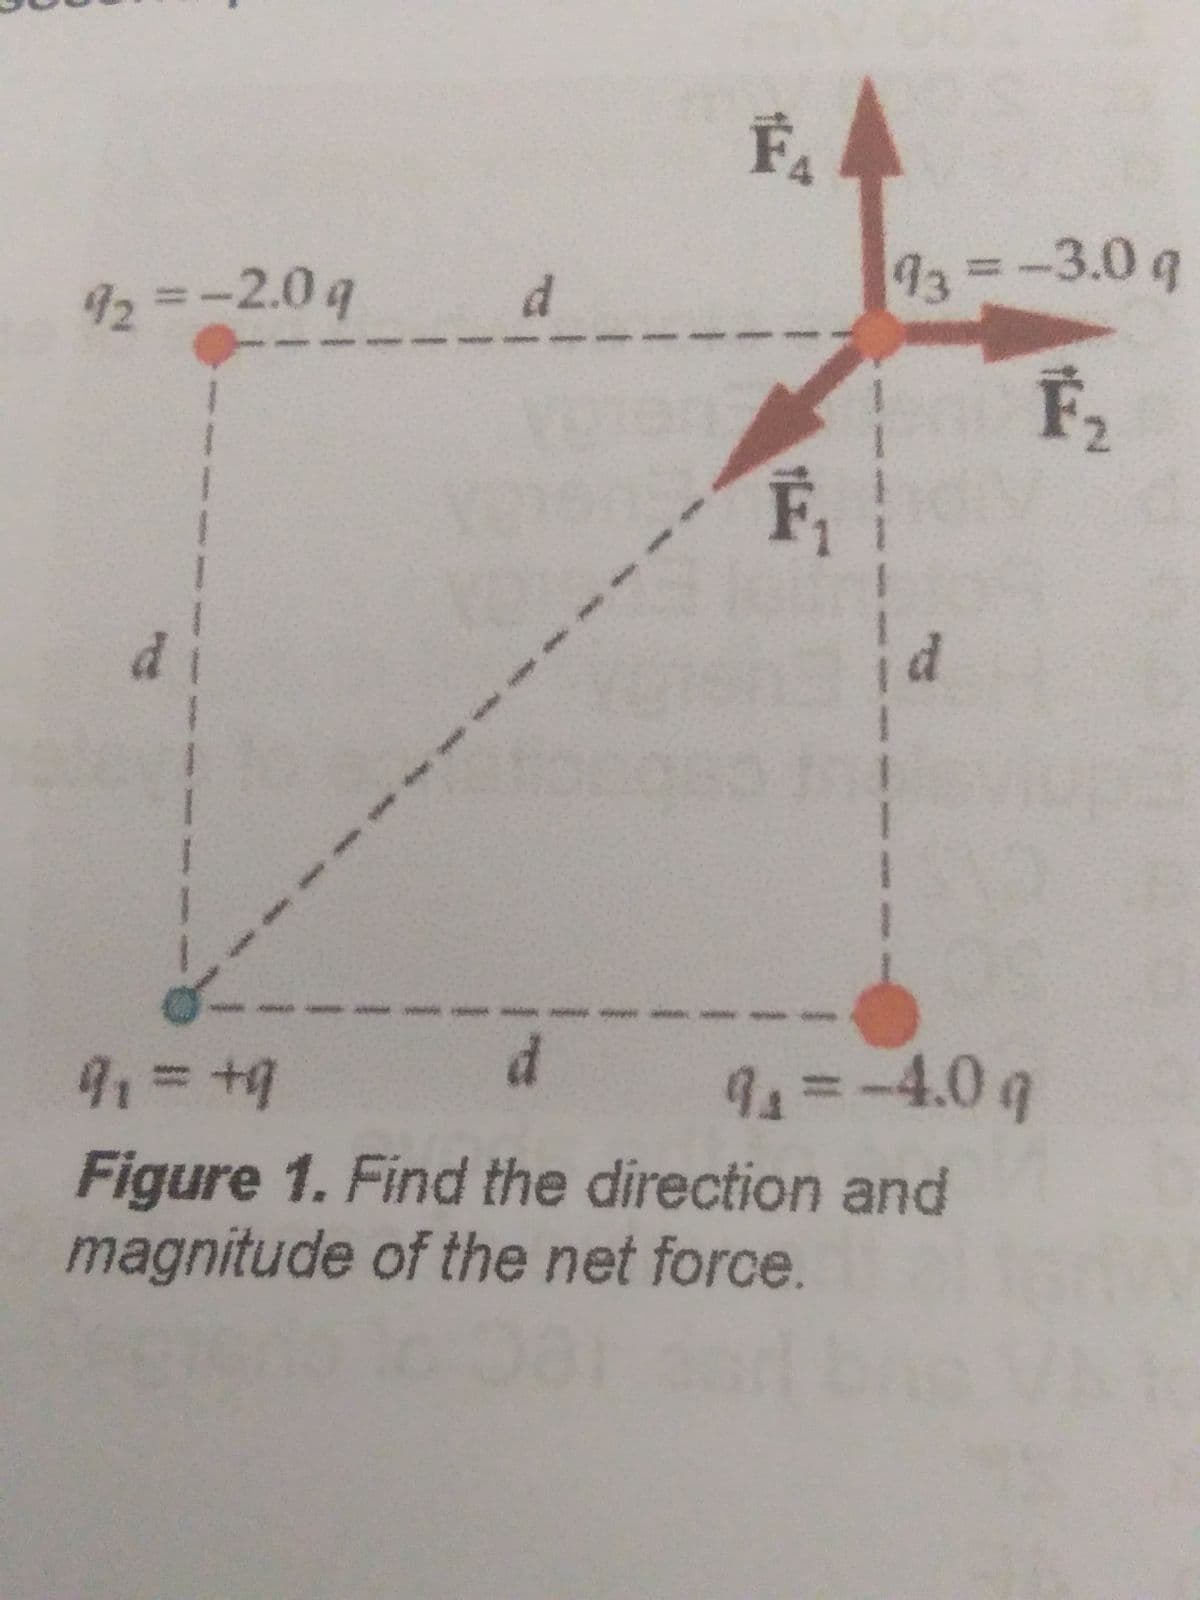 d
93 -3.0 q
92=-2.0q
2.
1 1
di
id
-4.0q
Figure 1. Find the direction and
magnitude of the net force.
一
